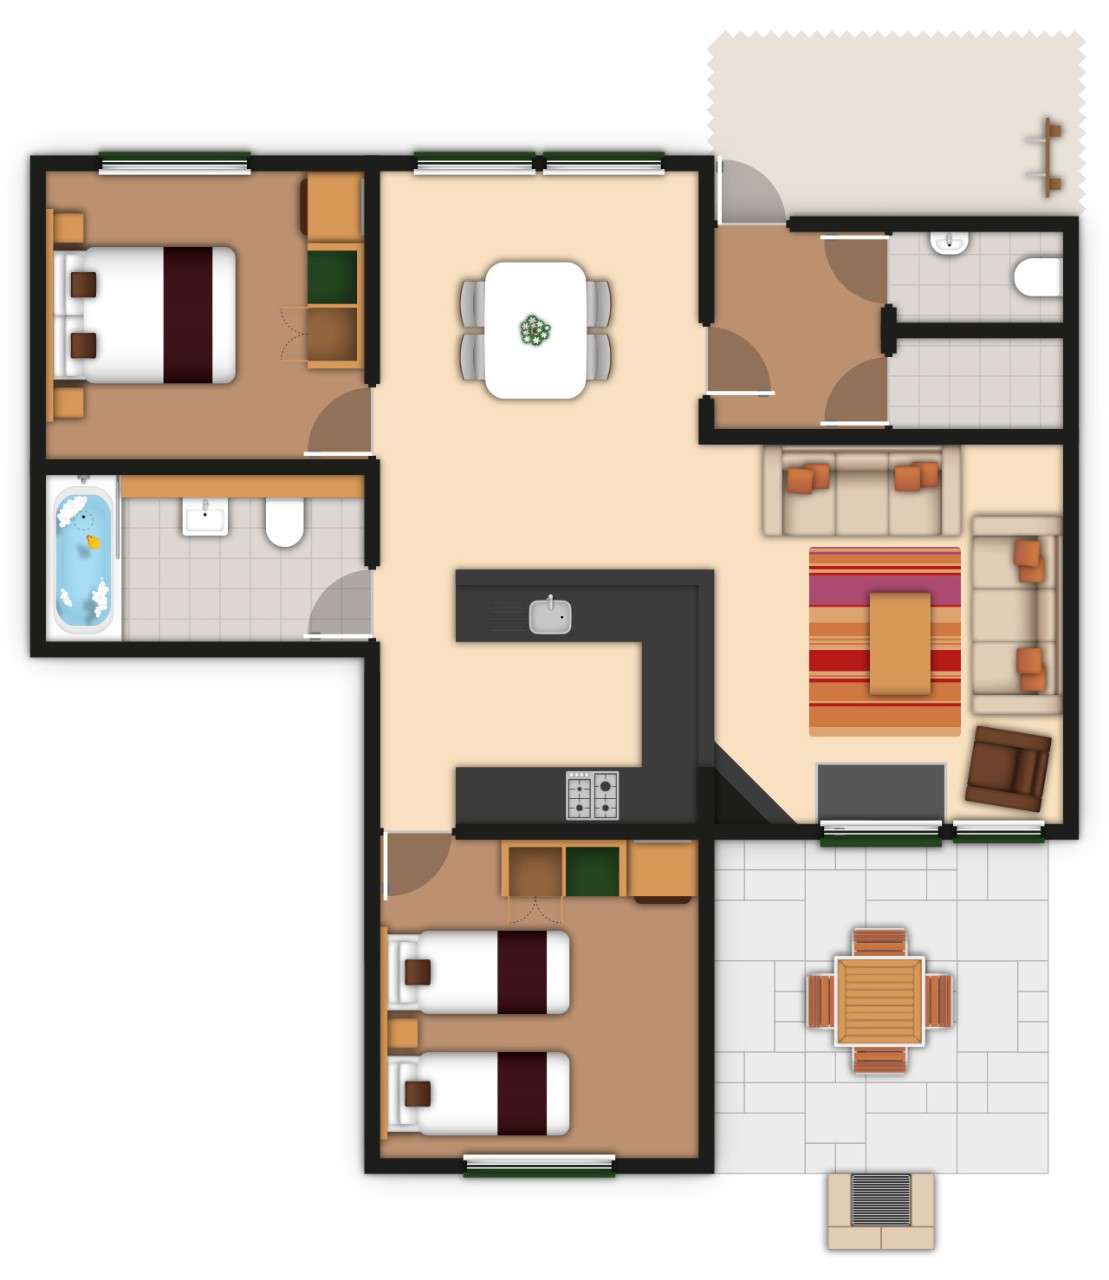 A detailed lodge floor plan illustration showing bedrooms, bathrooms, living area, kitchen and outdoor space. If you require further assistance viewing the floor plan or need further information on the accommodation type please contact Guest Services.